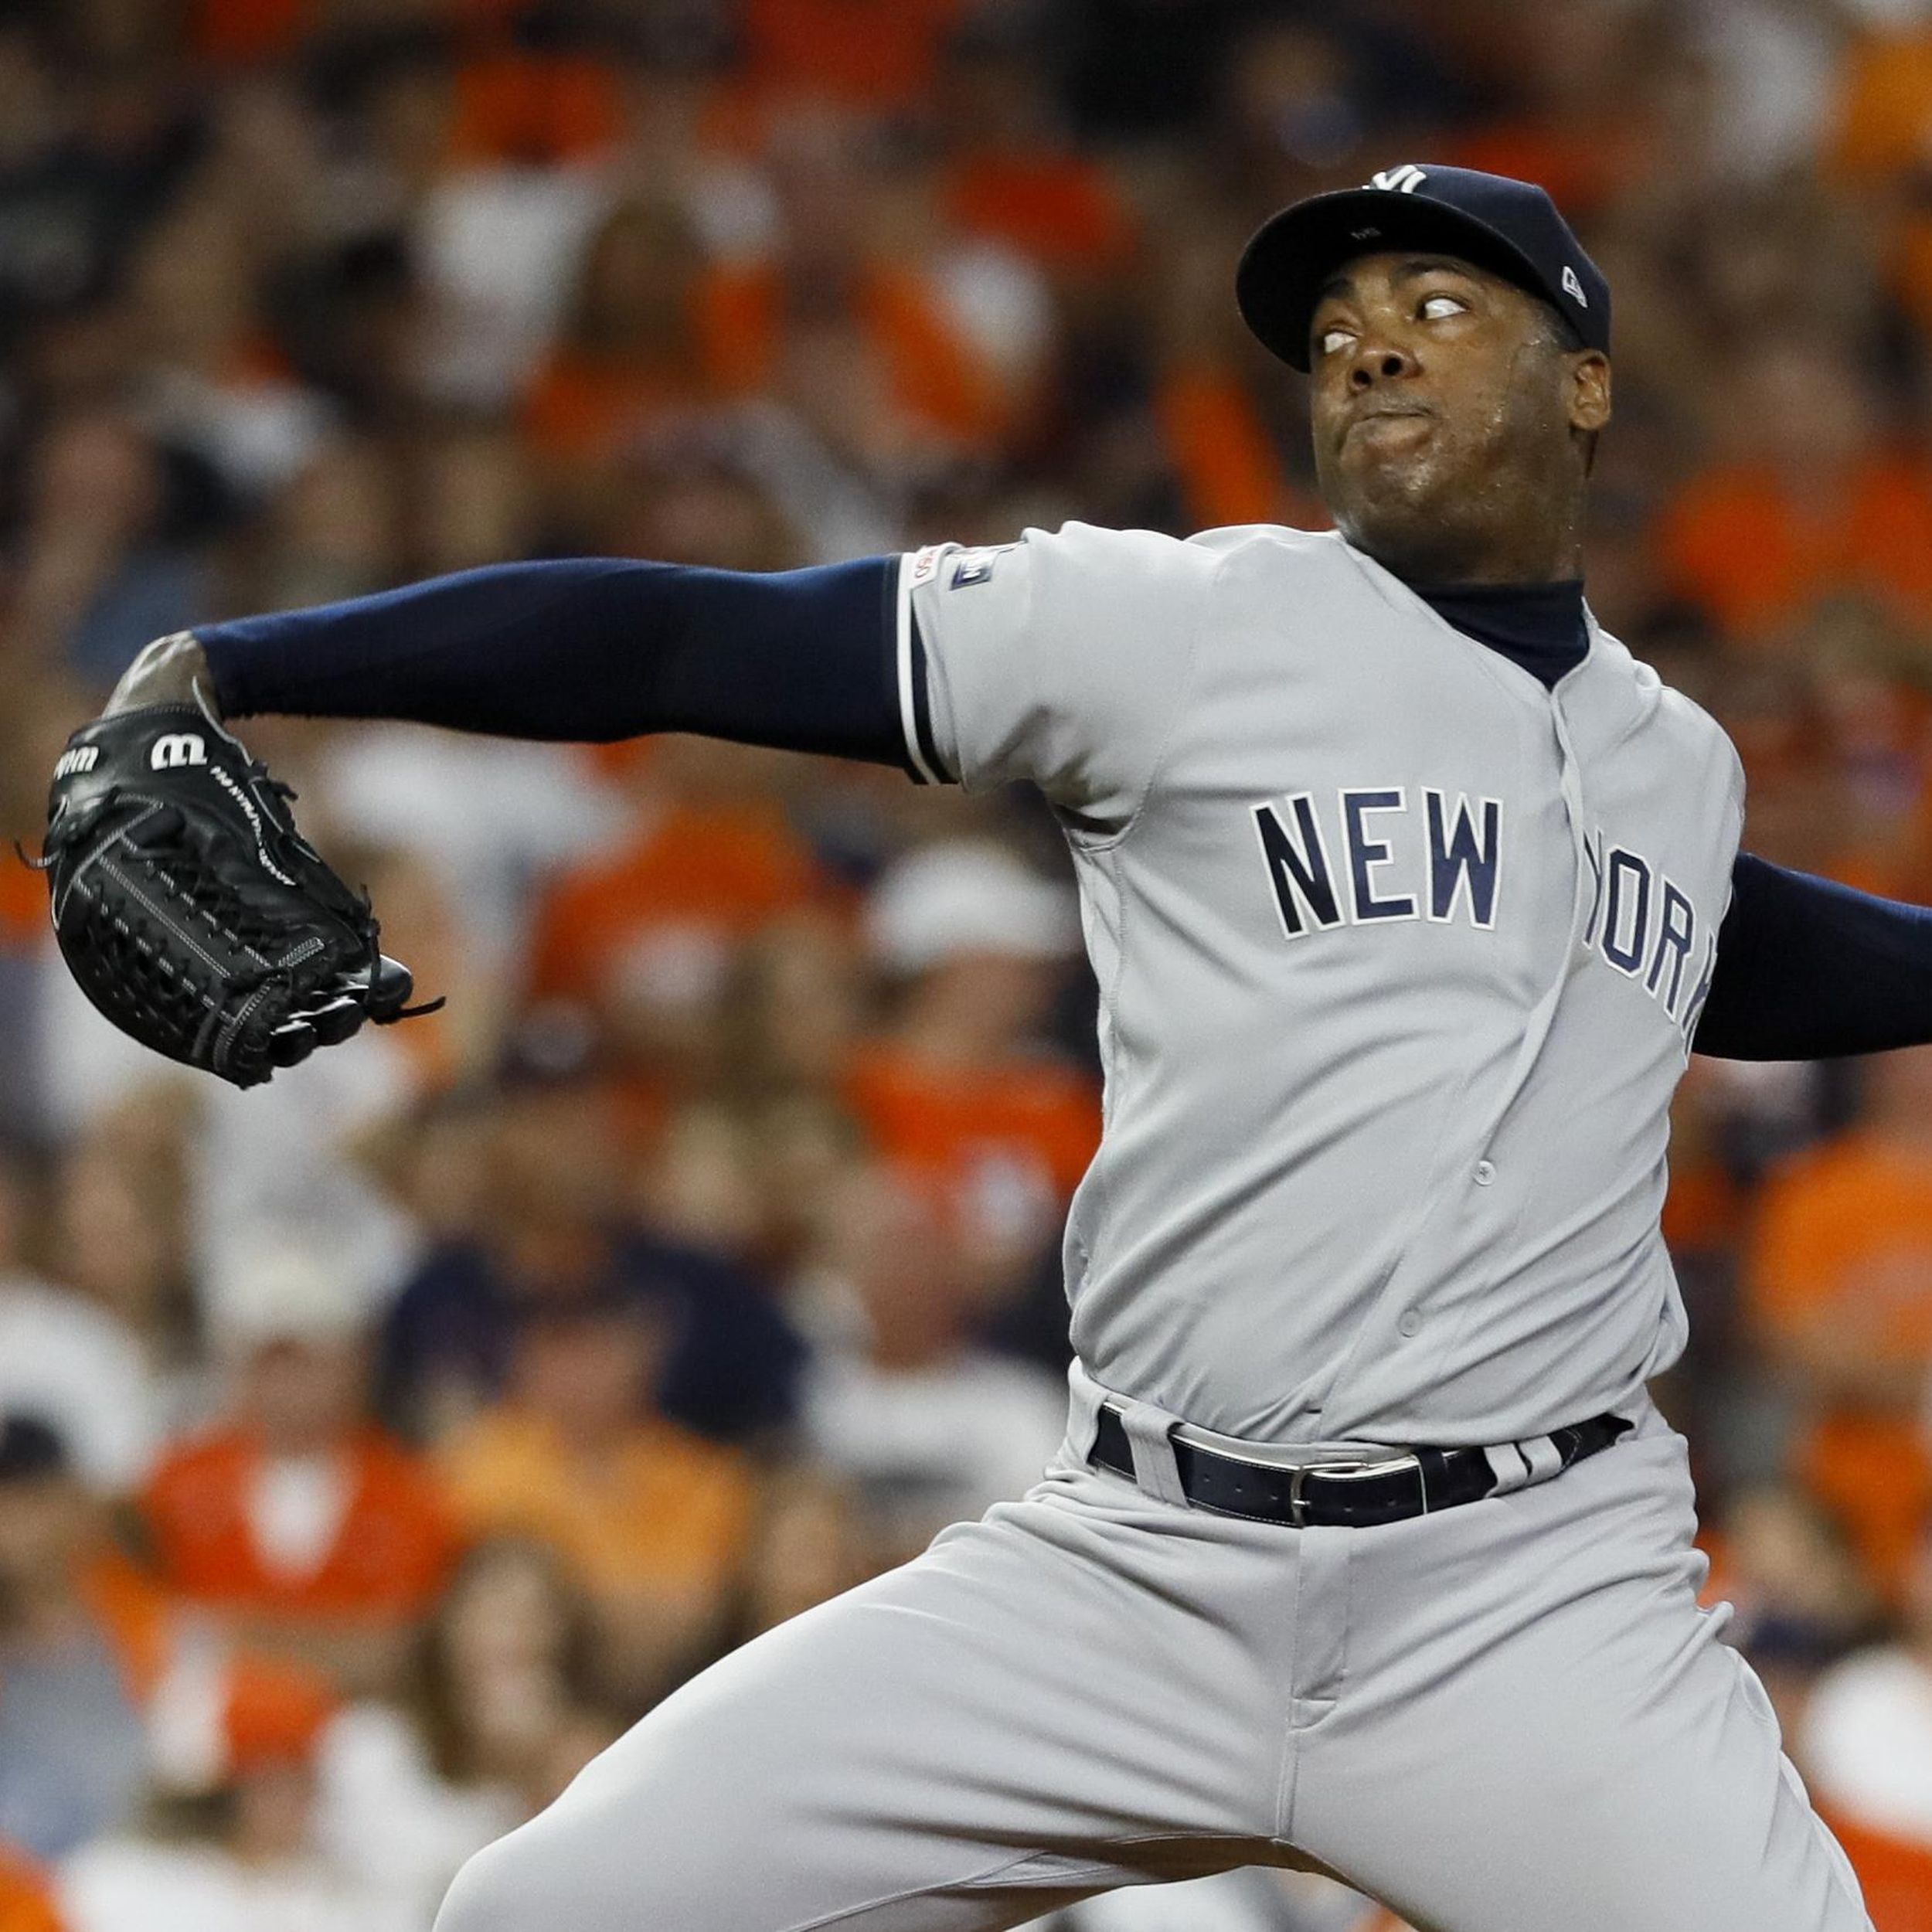 Aroldis Chapman Acquired by Yankees in Five-Year, $86 Million Deal